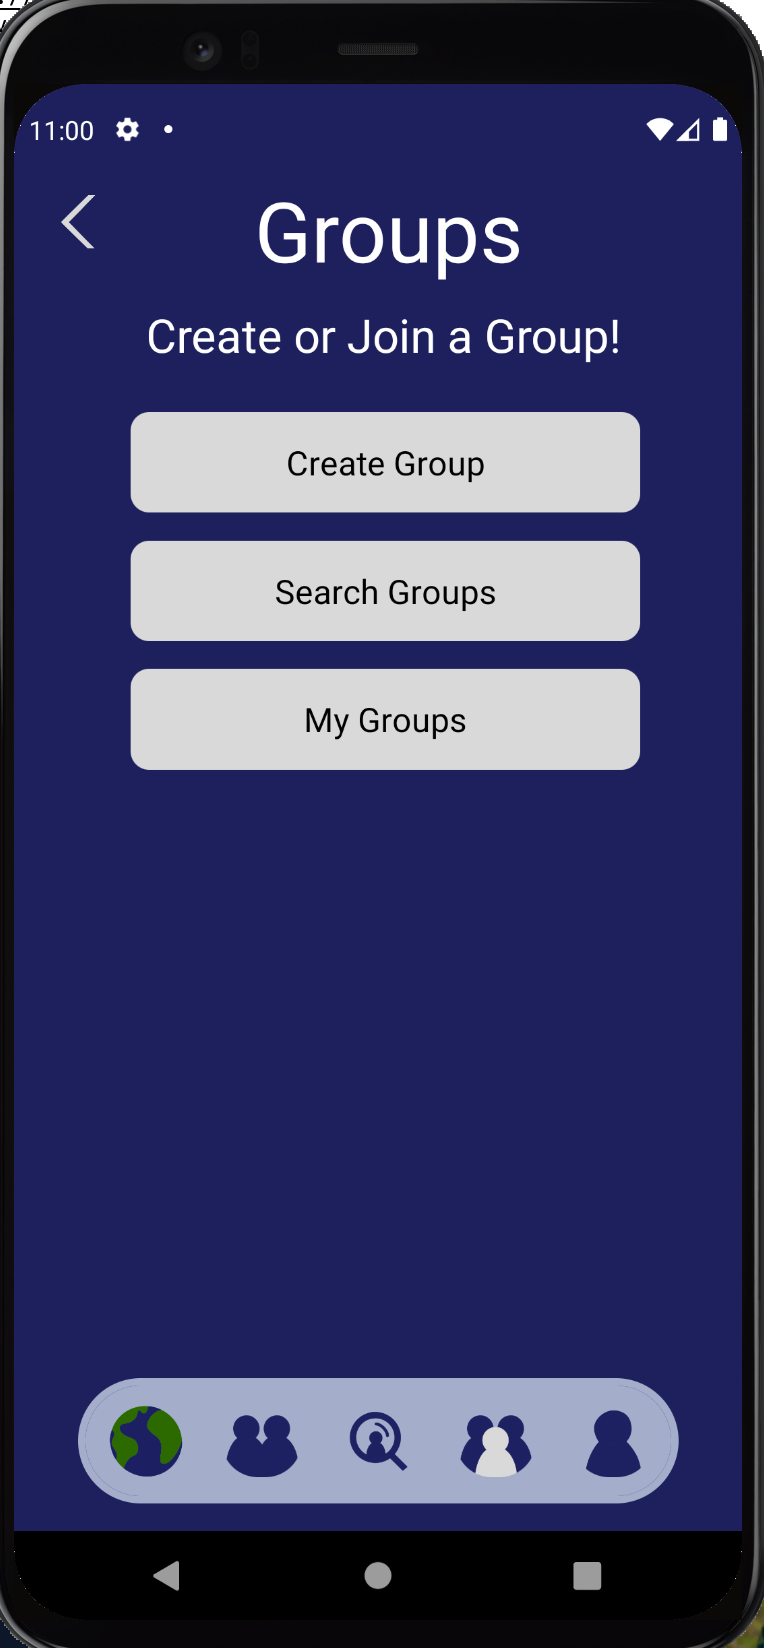 Groups Page